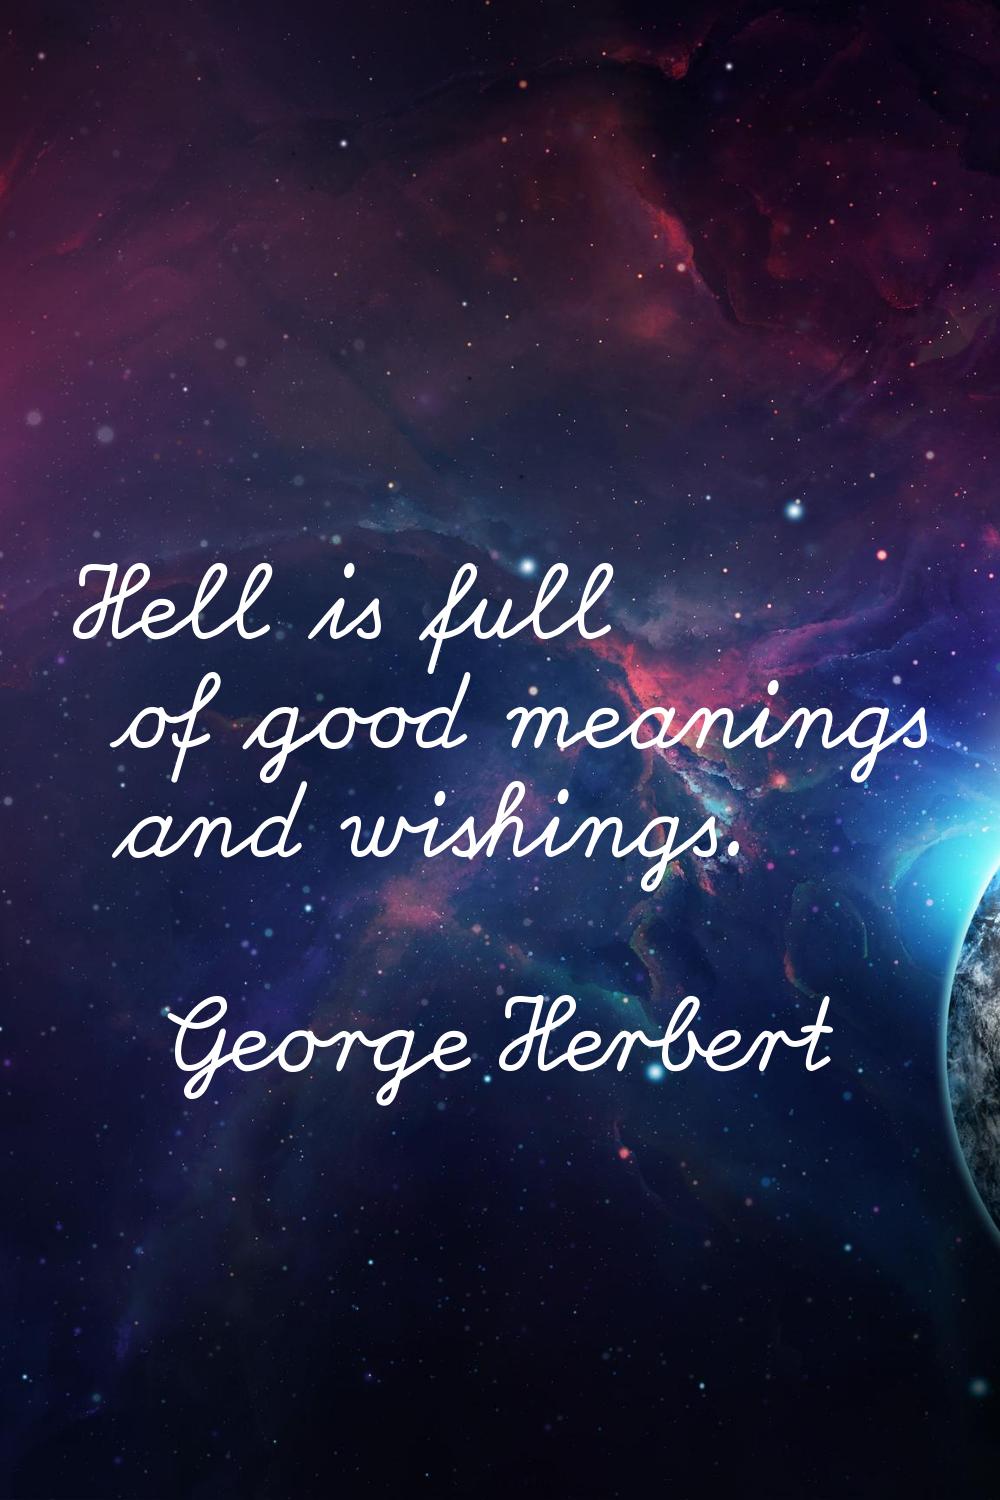 Hell is full of good meanings and wishings.